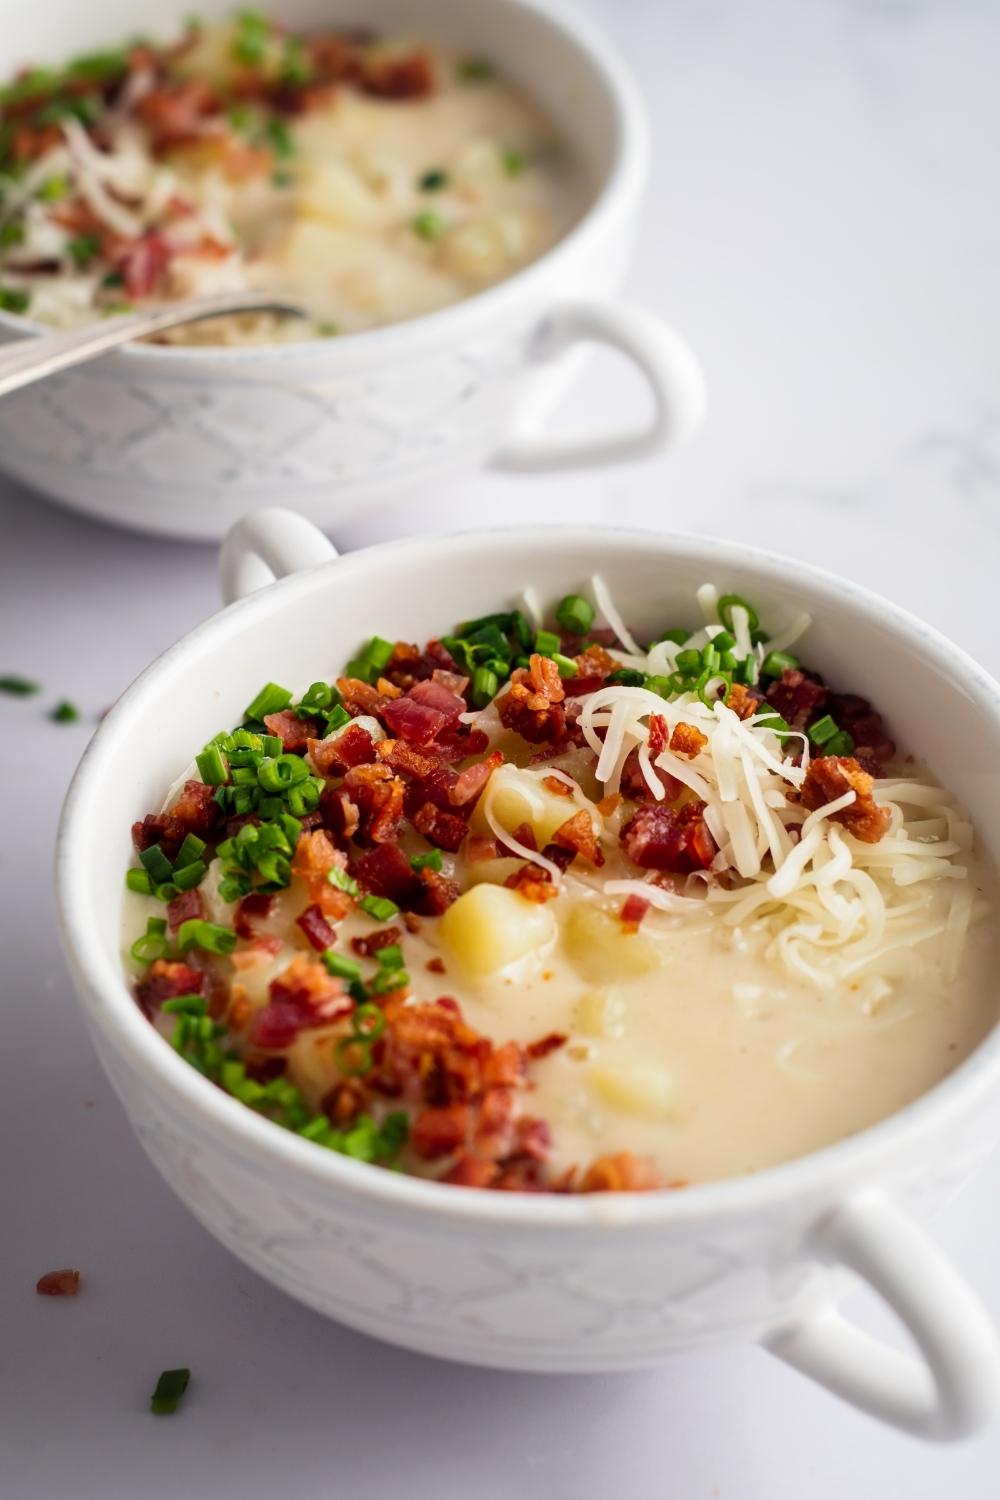 Chives, bacon, shredded cheese, creamy broth, and potatoes in a white bowl.